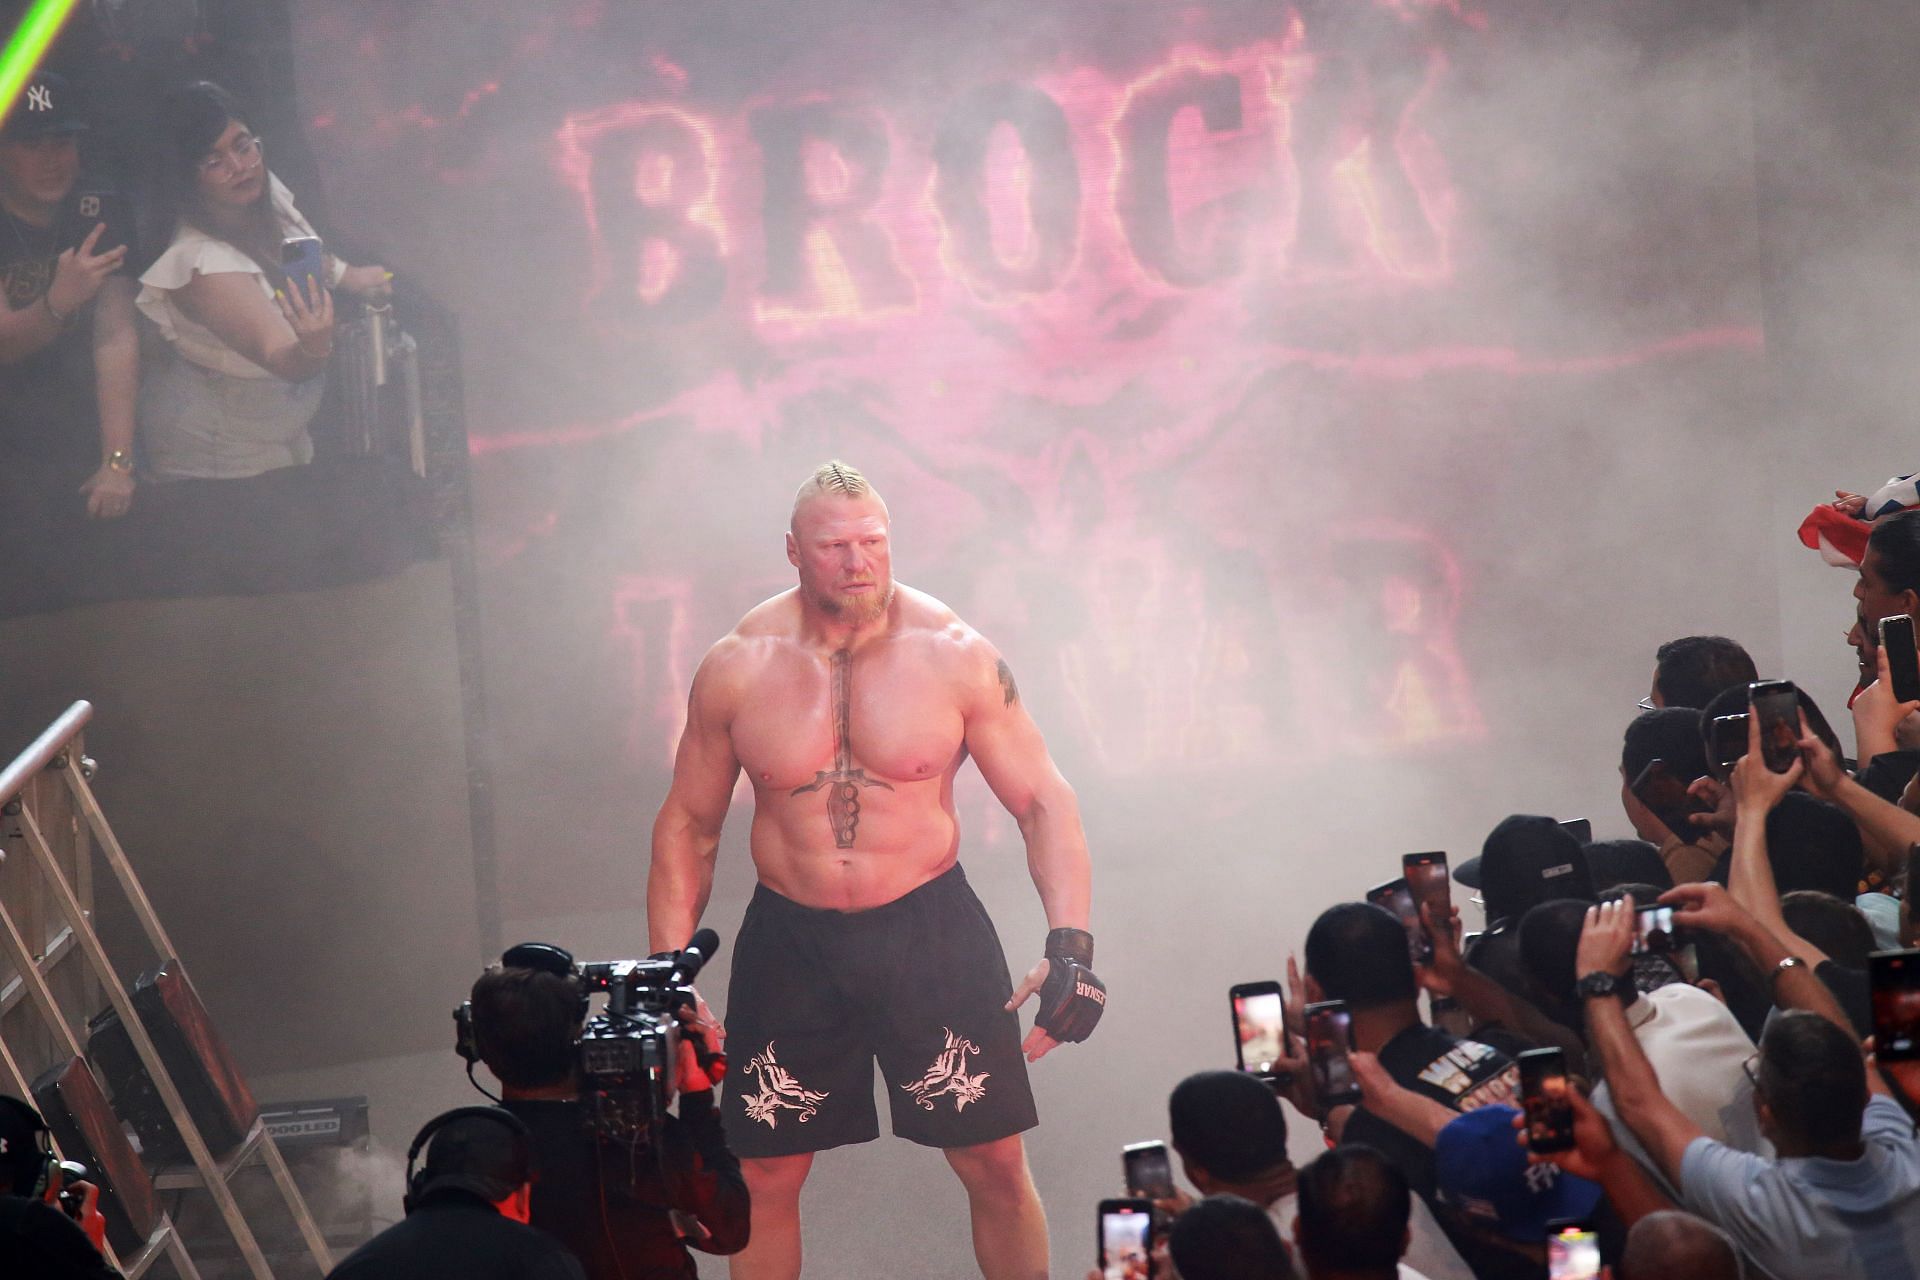 Despite not being names in the lawsuit, Brock Lesnar is in bad light.